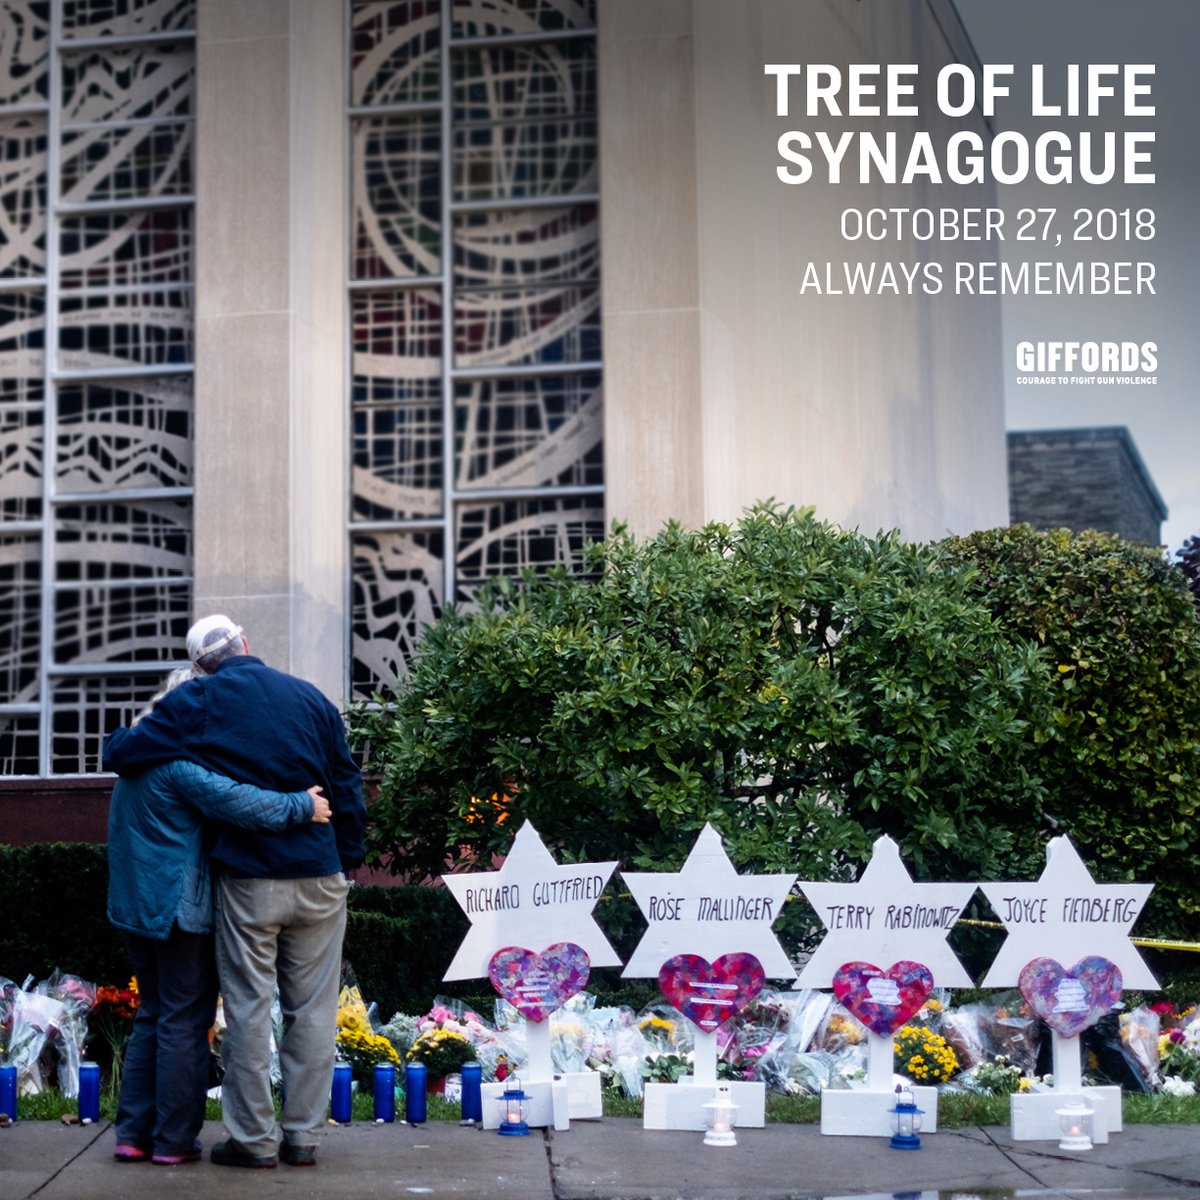 Five years ago today, 11 people were killed and six were injured by a white supremacist at the Tree of Life synagogue in Pittsburgh.

Our hearts go out to the Jewish community as we recommit to eradicating anti-Semitism and ensuring all sacred spaces are safe. #DisarmHate